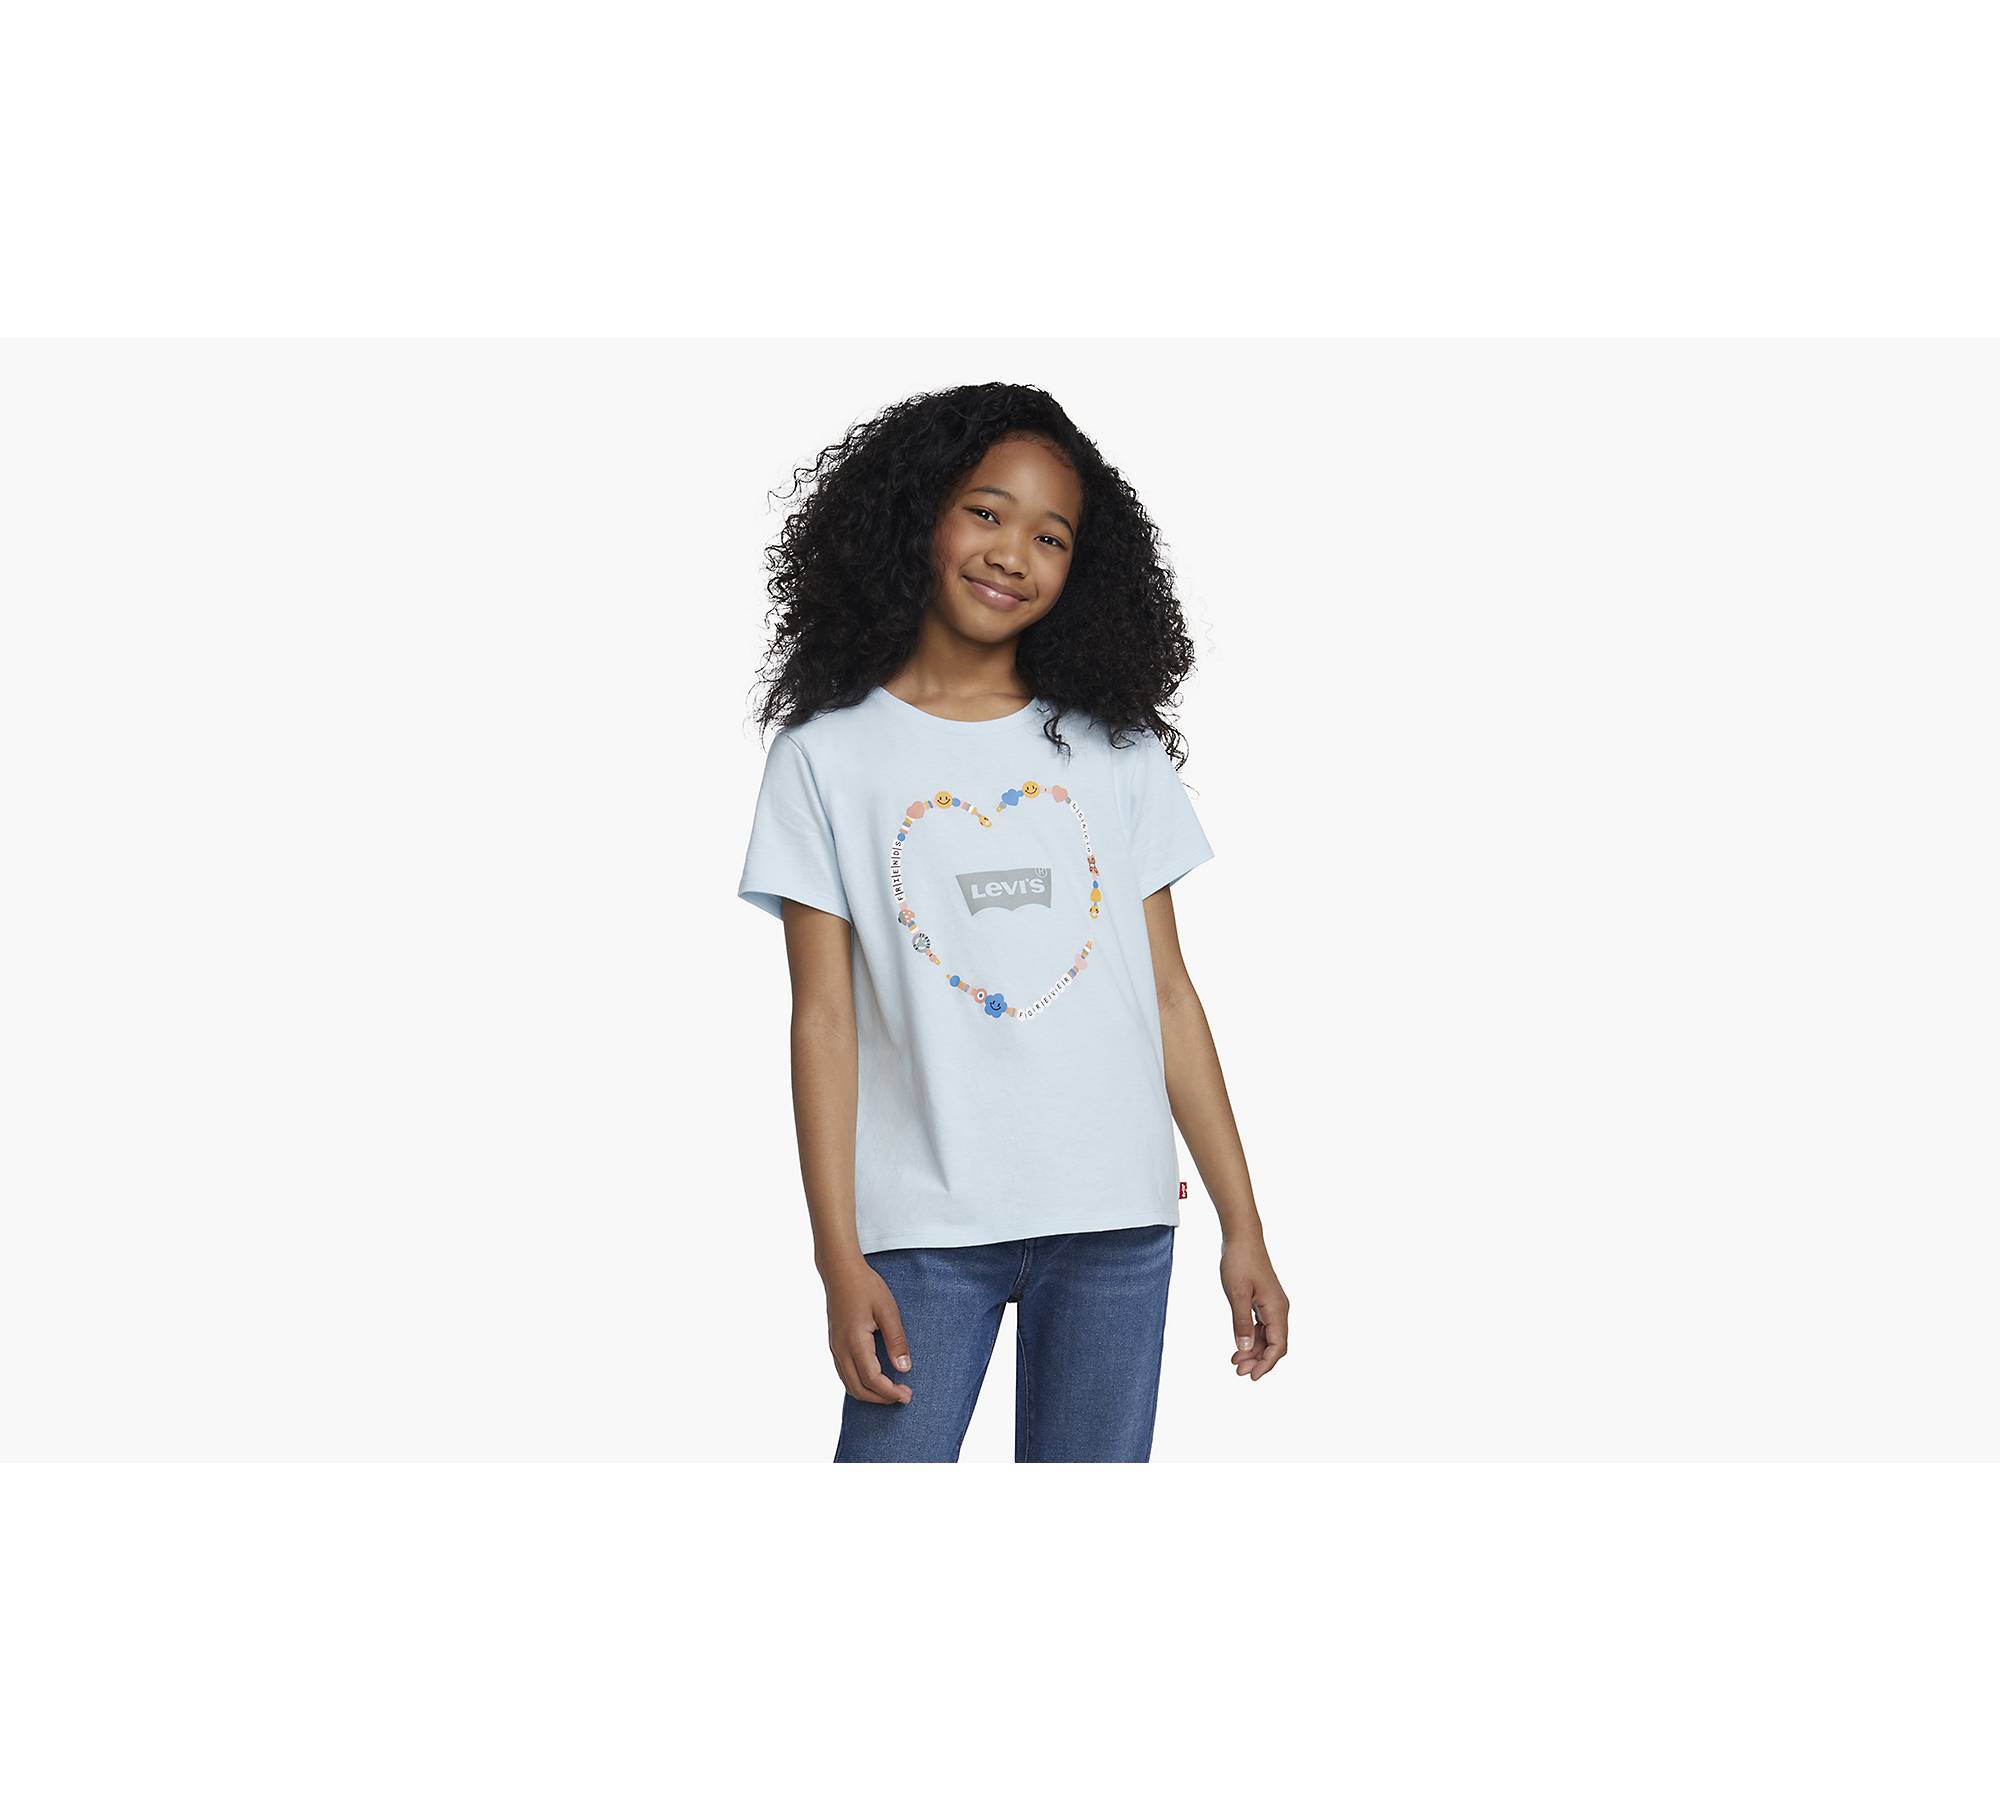 Lucky Brand Slim T-shirts for Women